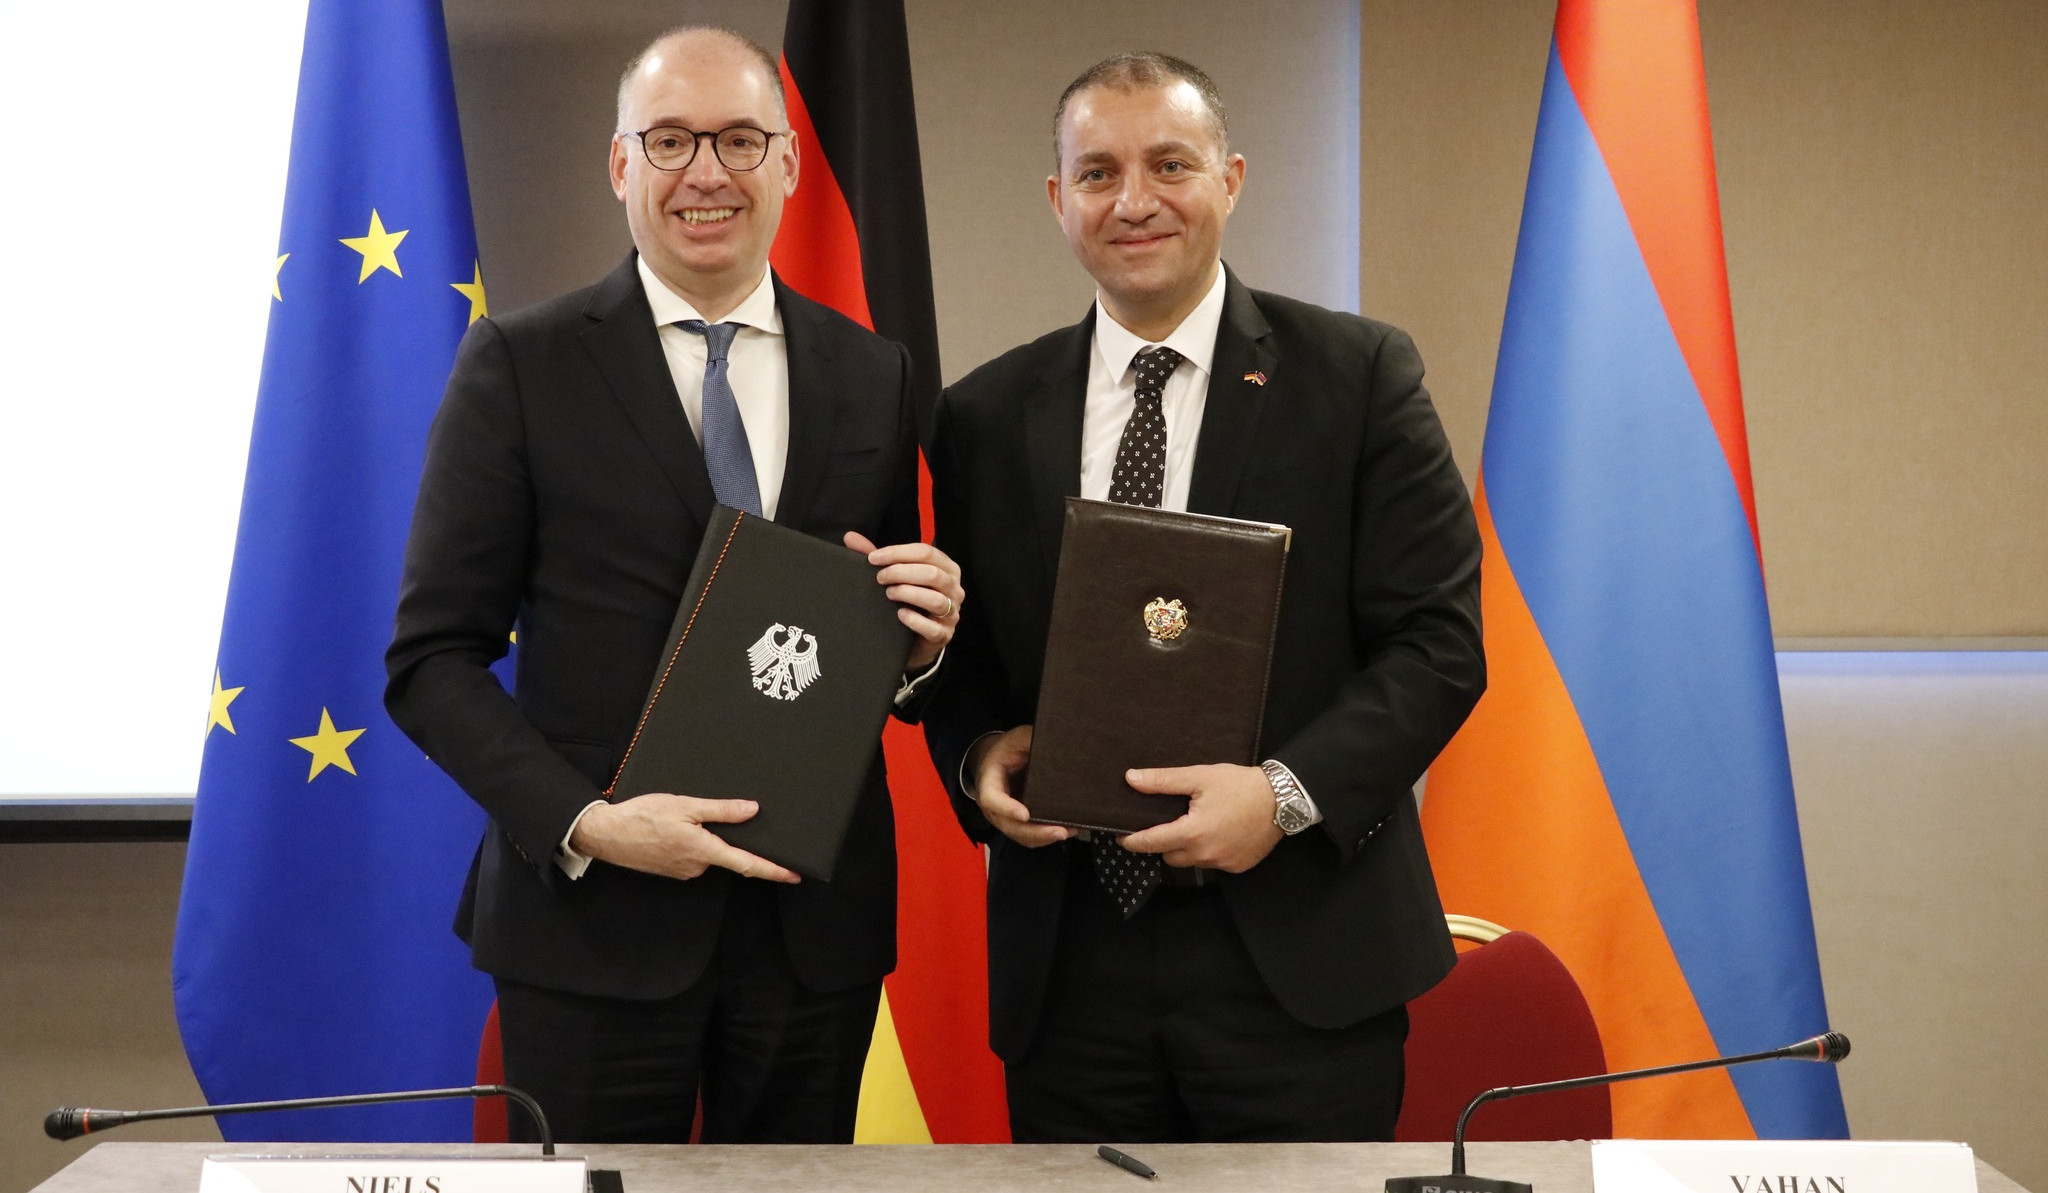 As result of intergovernmental negotiations on development of Armenian-German cooperation, protocol signed